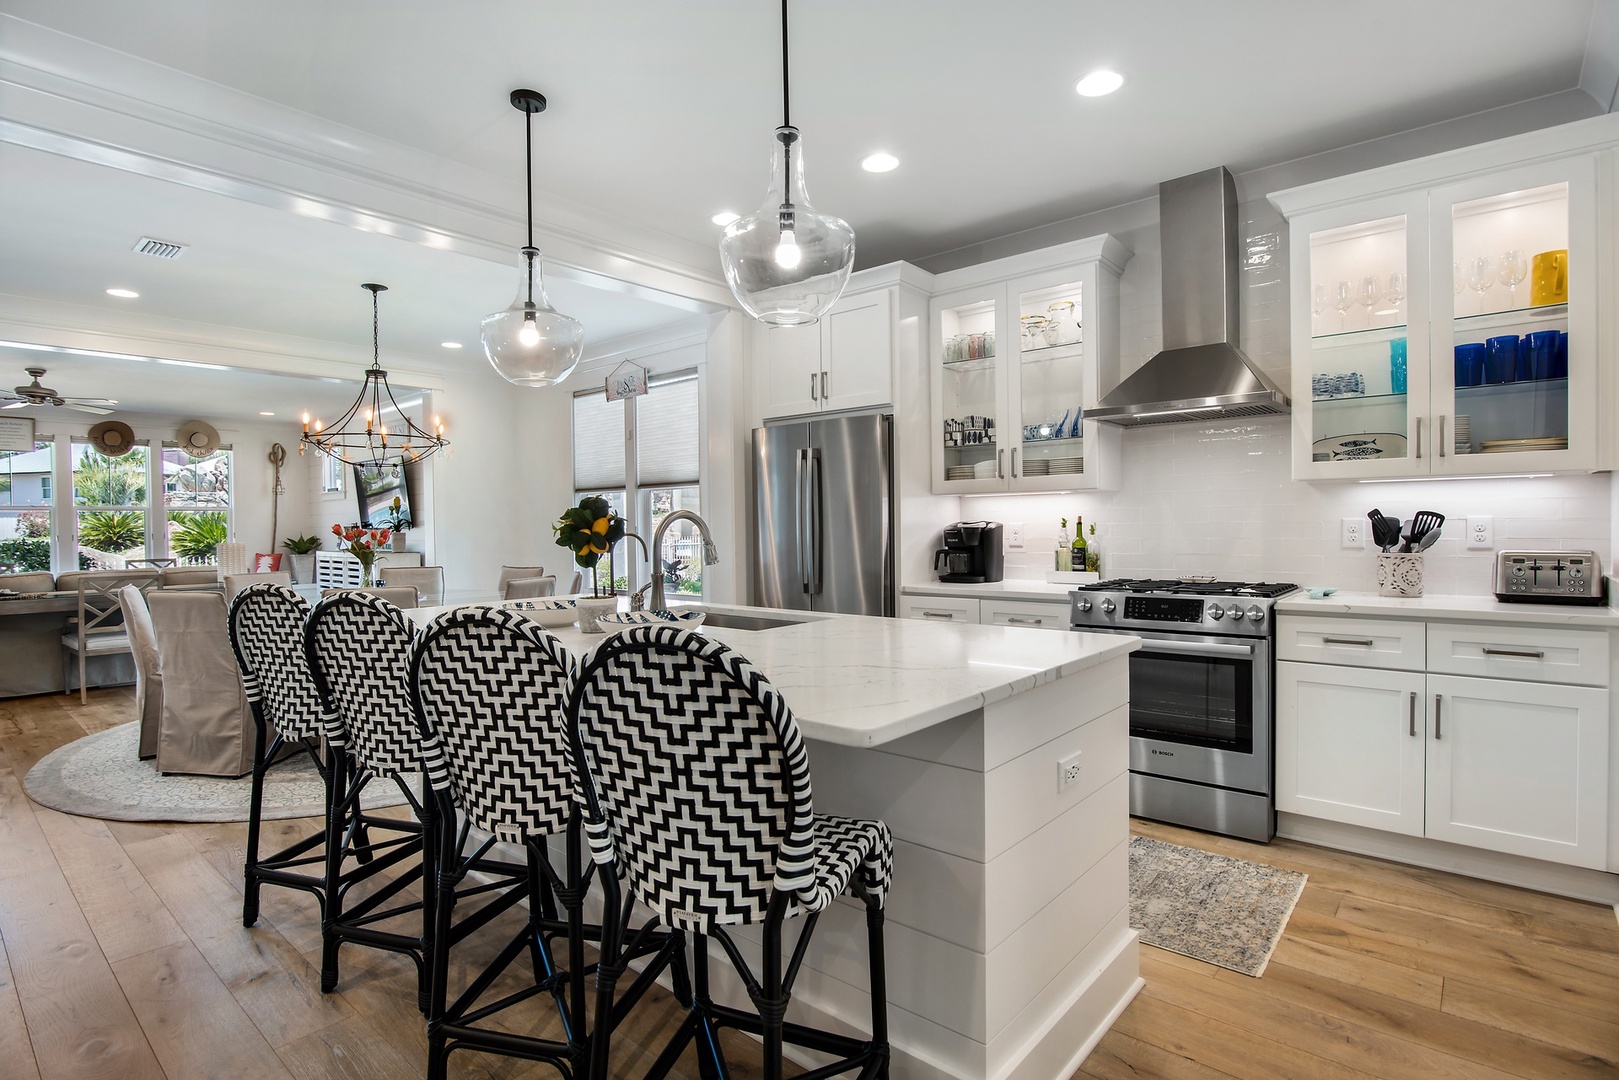 The chef in the family will enjoy being part of the conversation with this open plan kitchen!